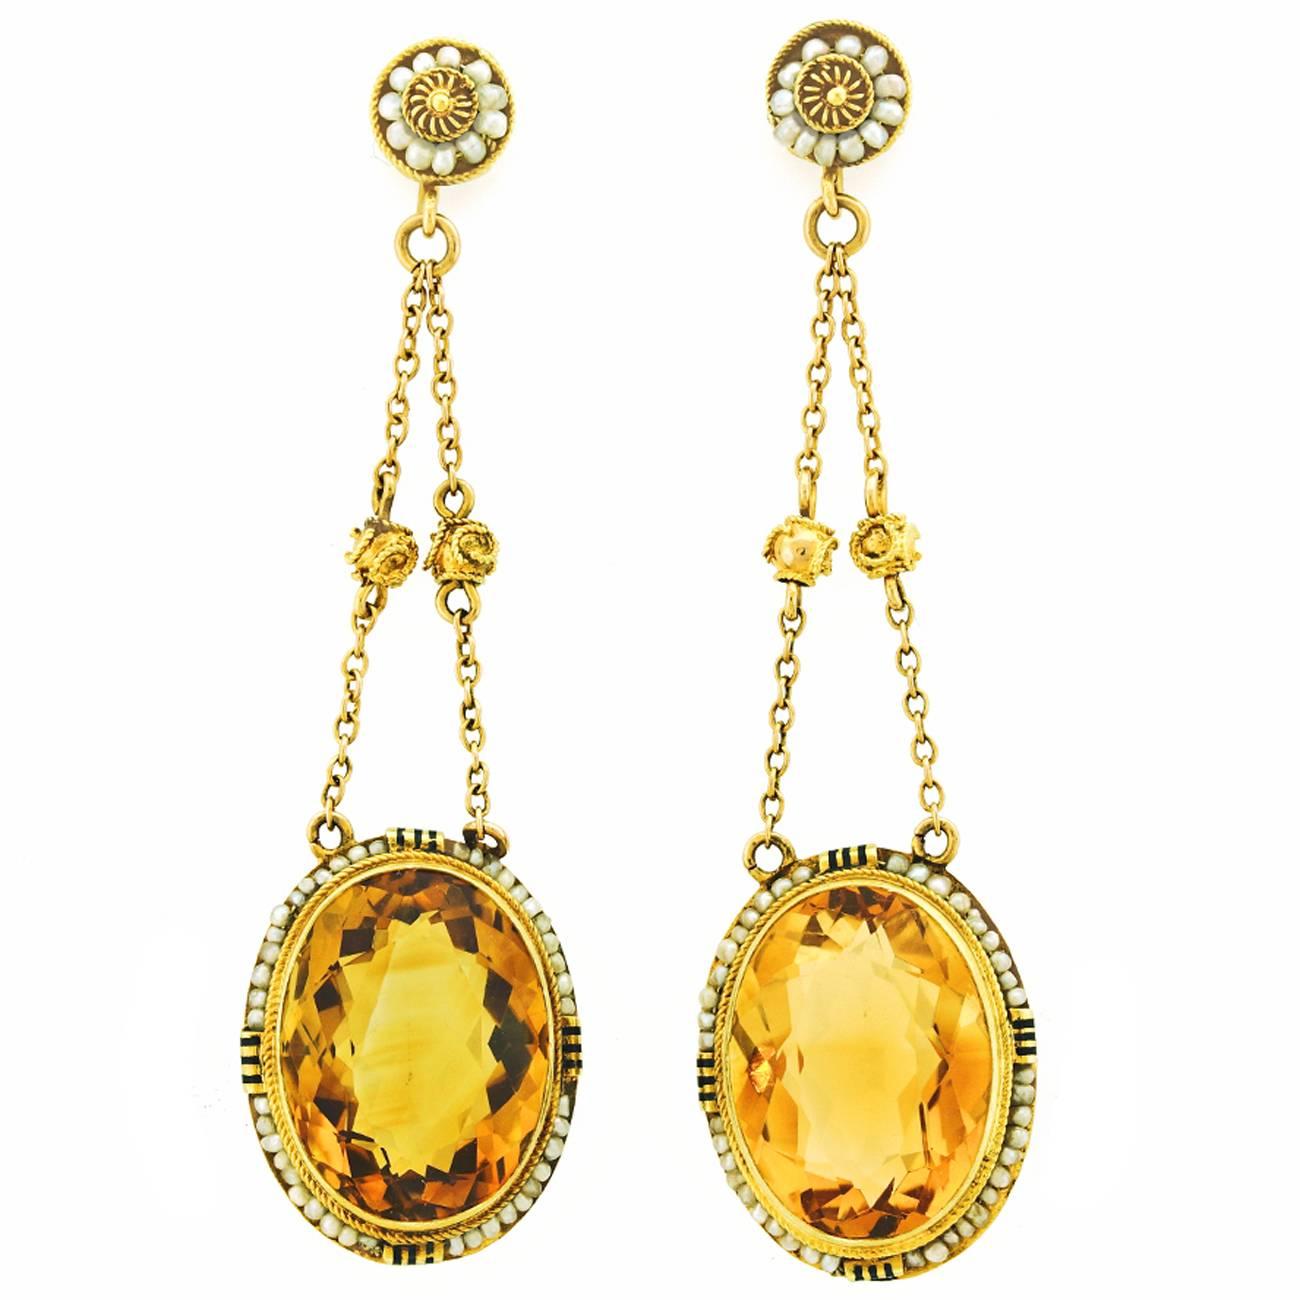 Antique Citrine and Pearl Dangle Earrings